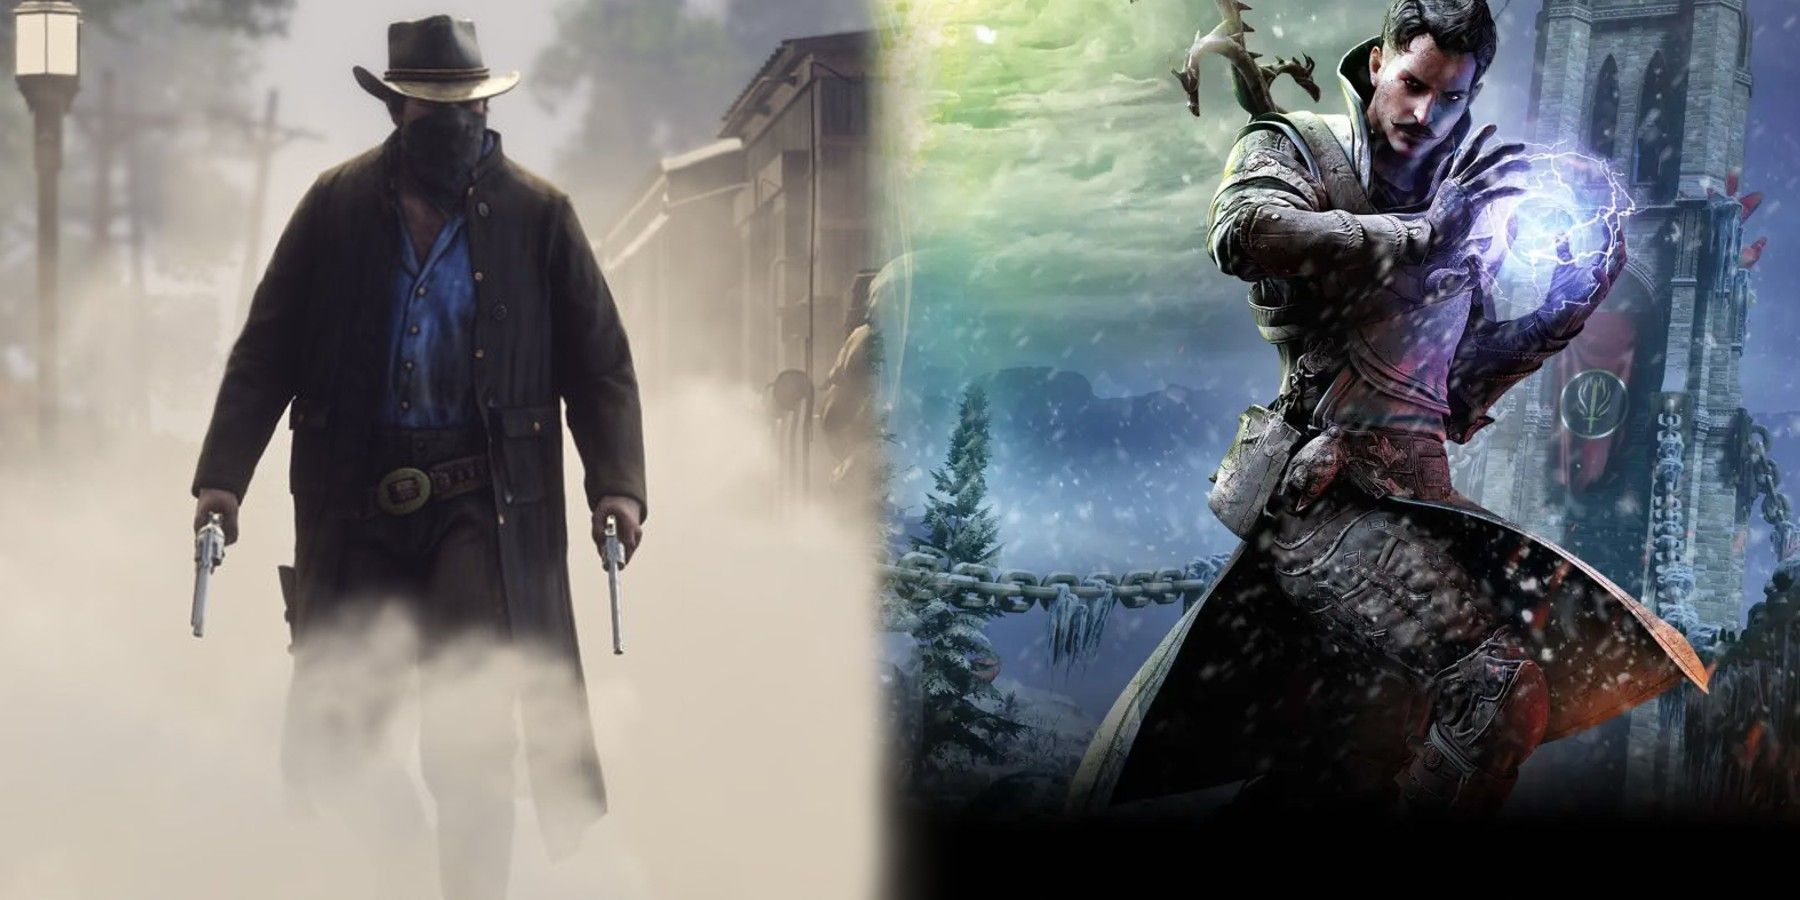 dragon-age-red-dead-redemption-similarities